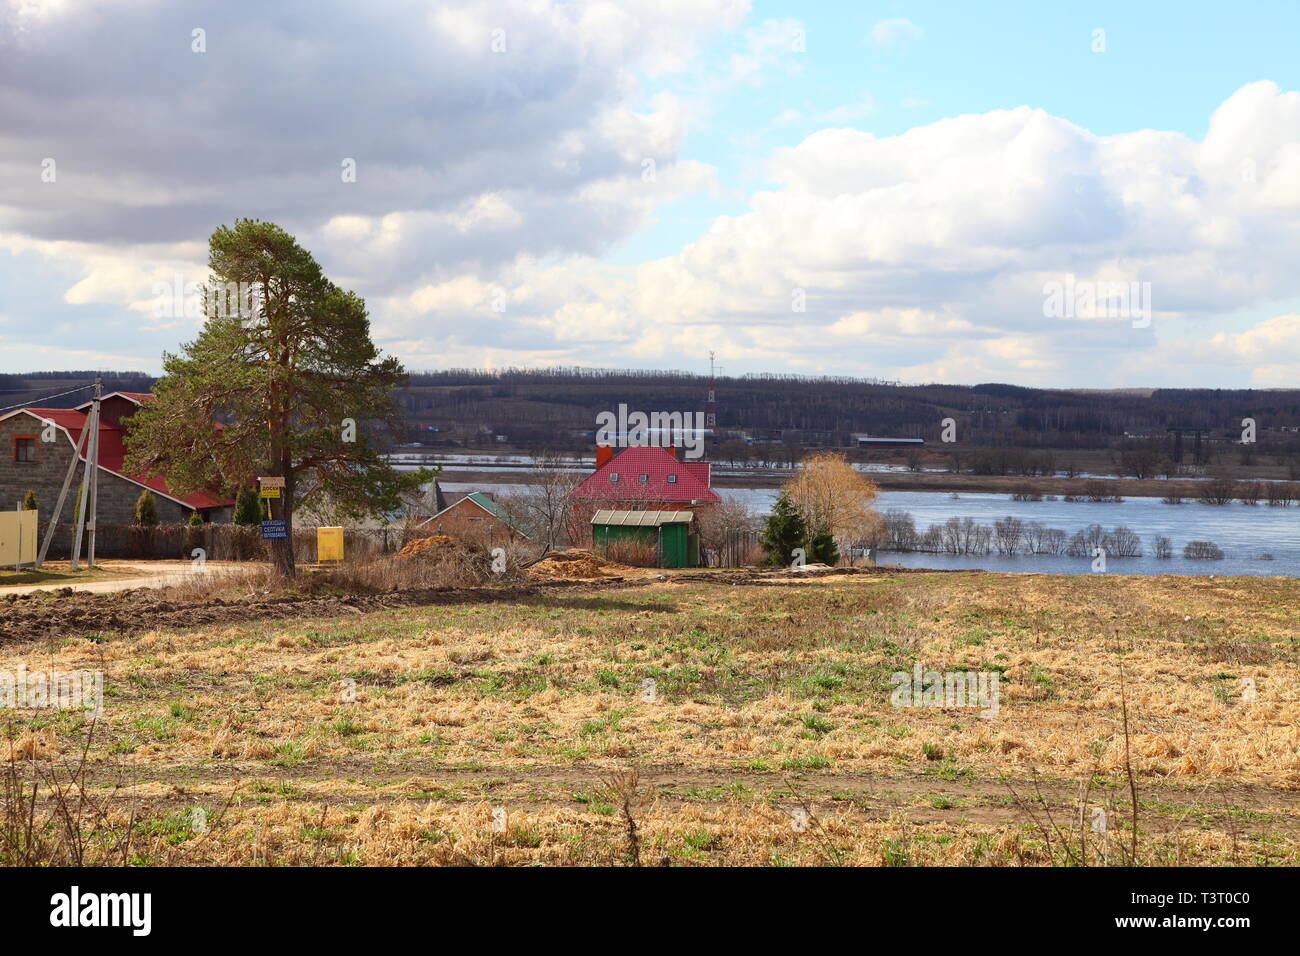 House with a red roof on the river bank. Spring flood of the river. Stock Photo